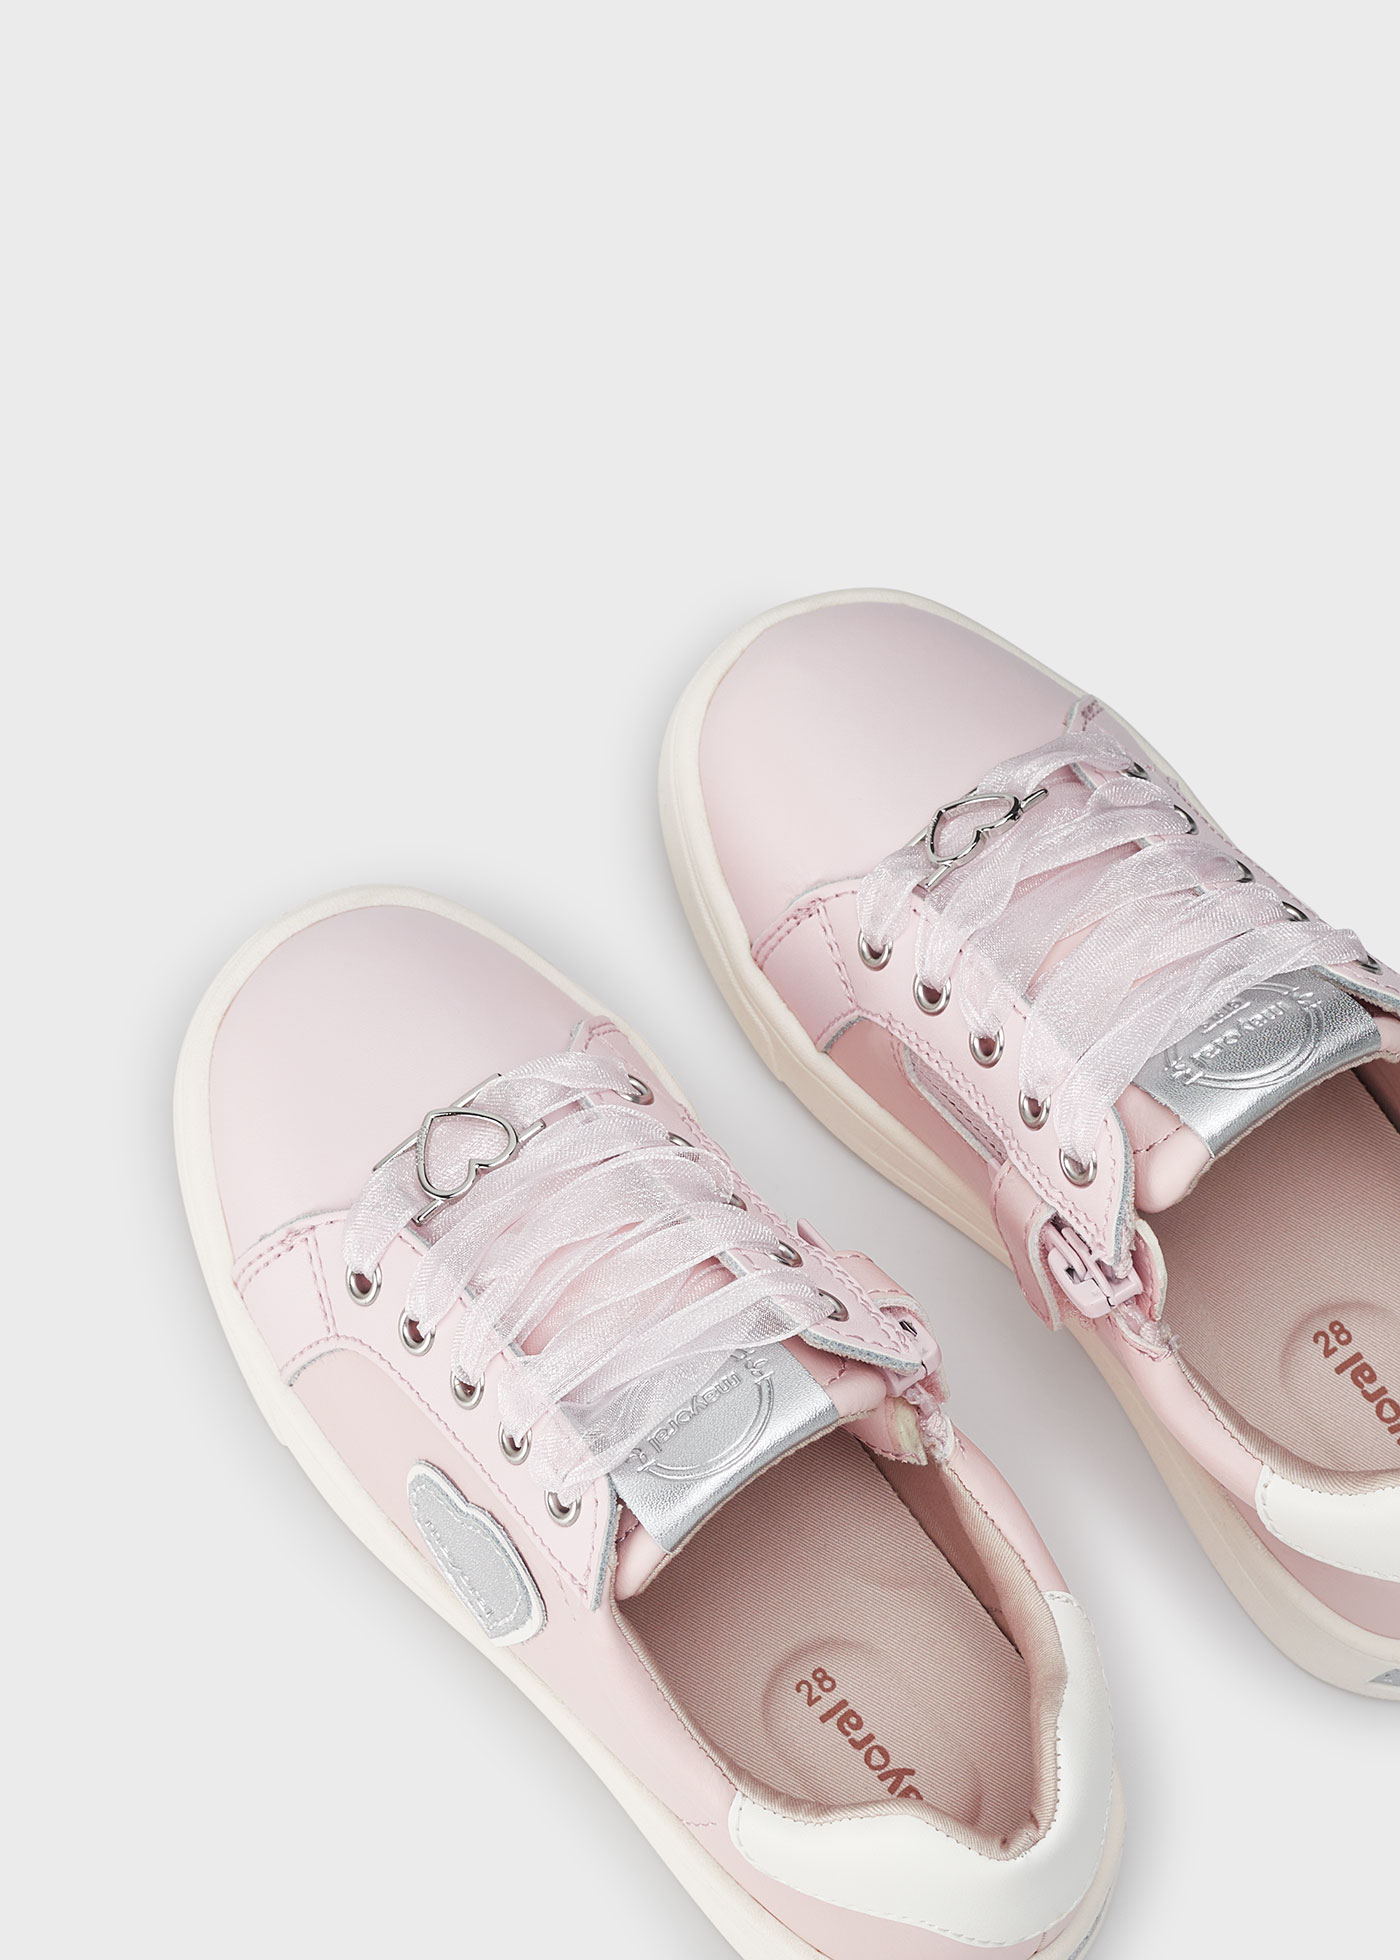 Girls sneakers heart sustainable leather